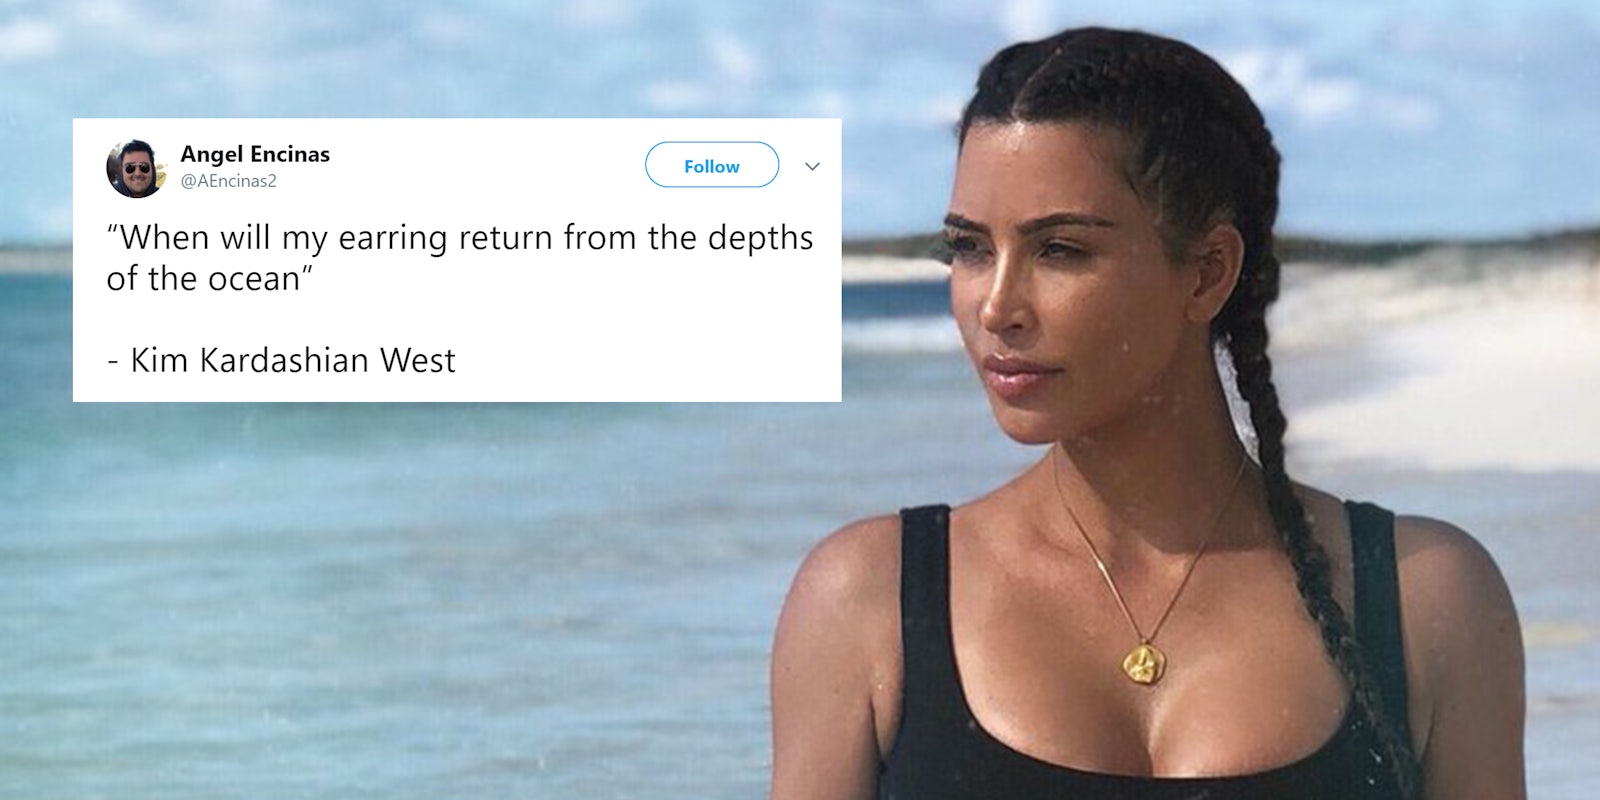 Kim Kardashian at the beach with 'When will my earring return from the depths of the ocean' tweet